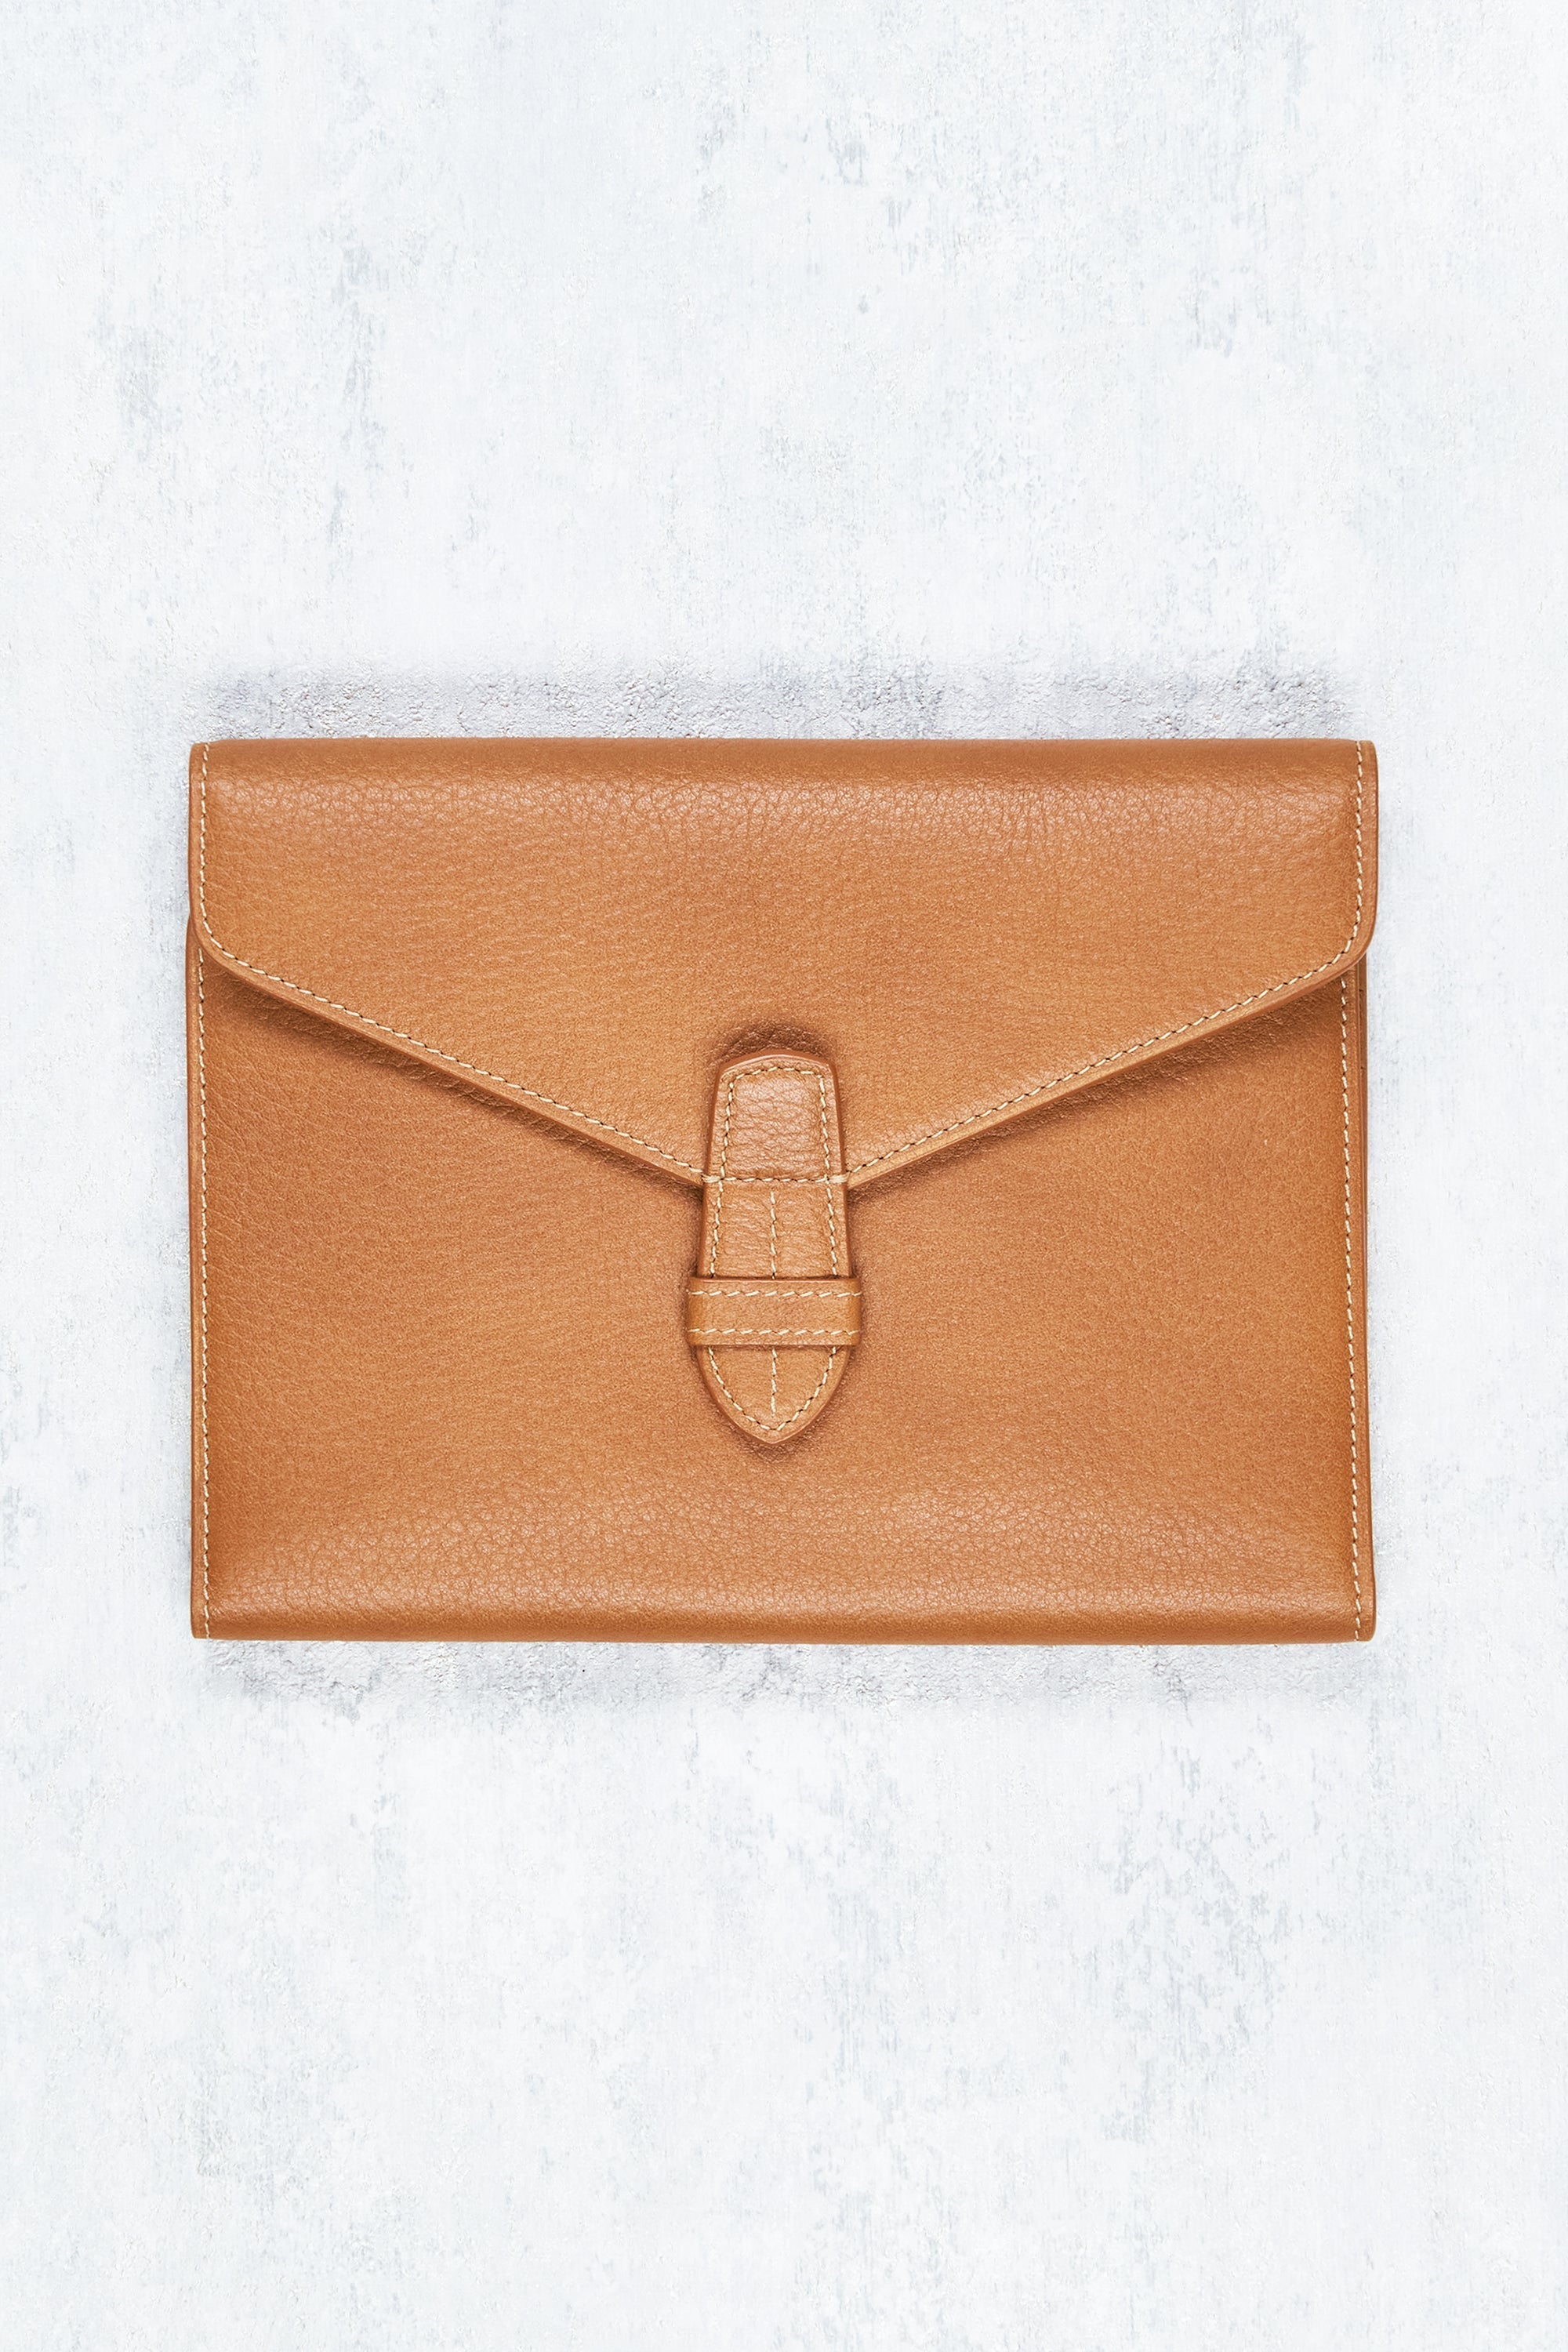 Acate Tivano Brown Calf Leather Wallet